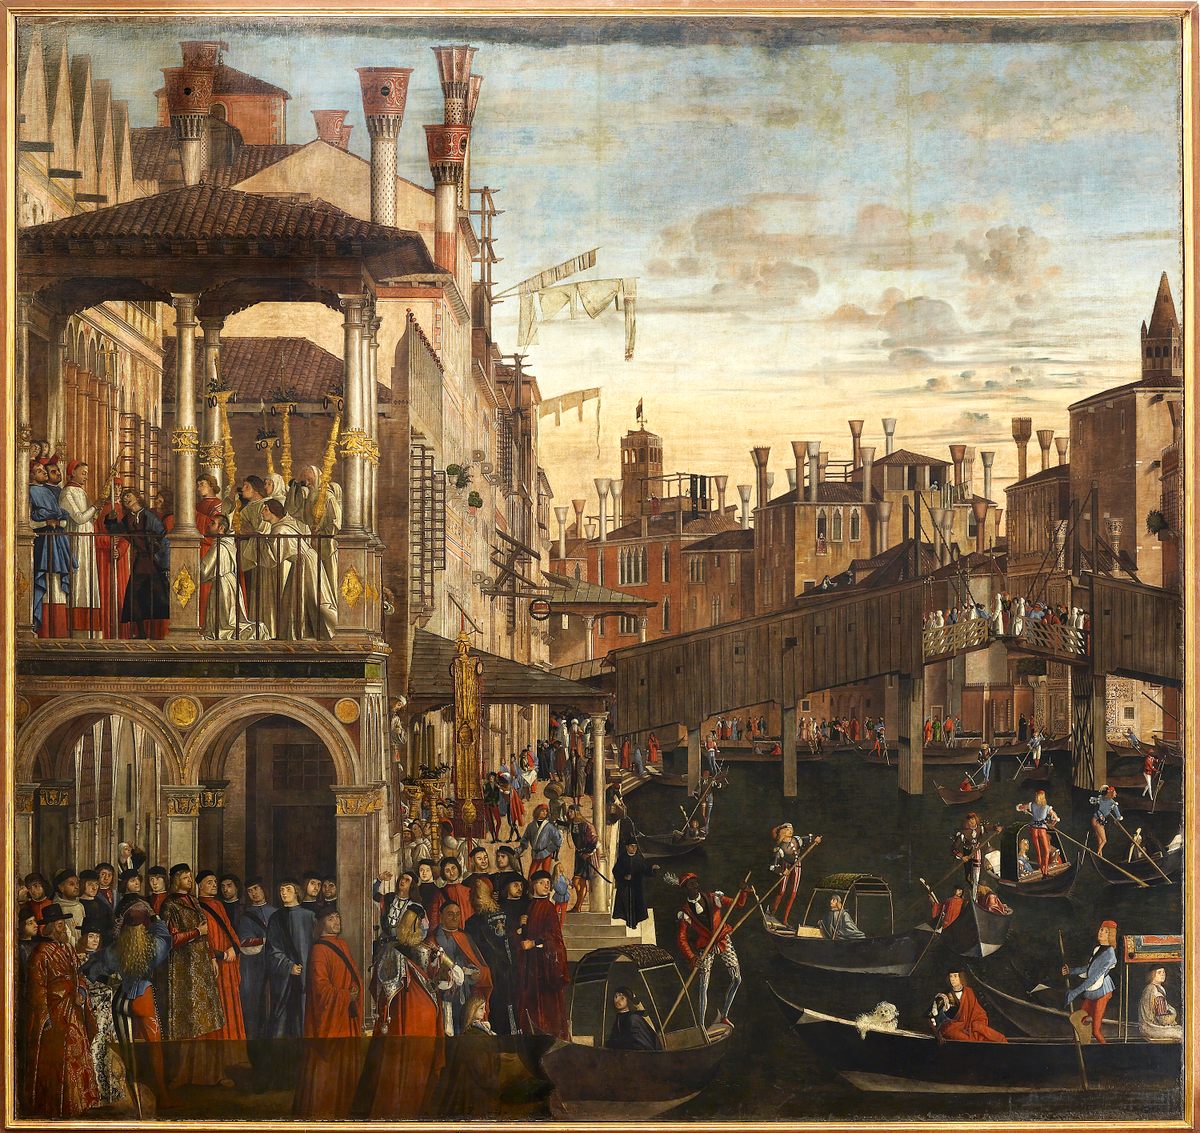 Fifteenth-century Venice, as depicted in <em>Miracle of the Relic of the True Cross at the Rialto Bridge</em> or <em>The Healing of the Possessed Man</em>, by Vittore Carpaccio, 1494. 